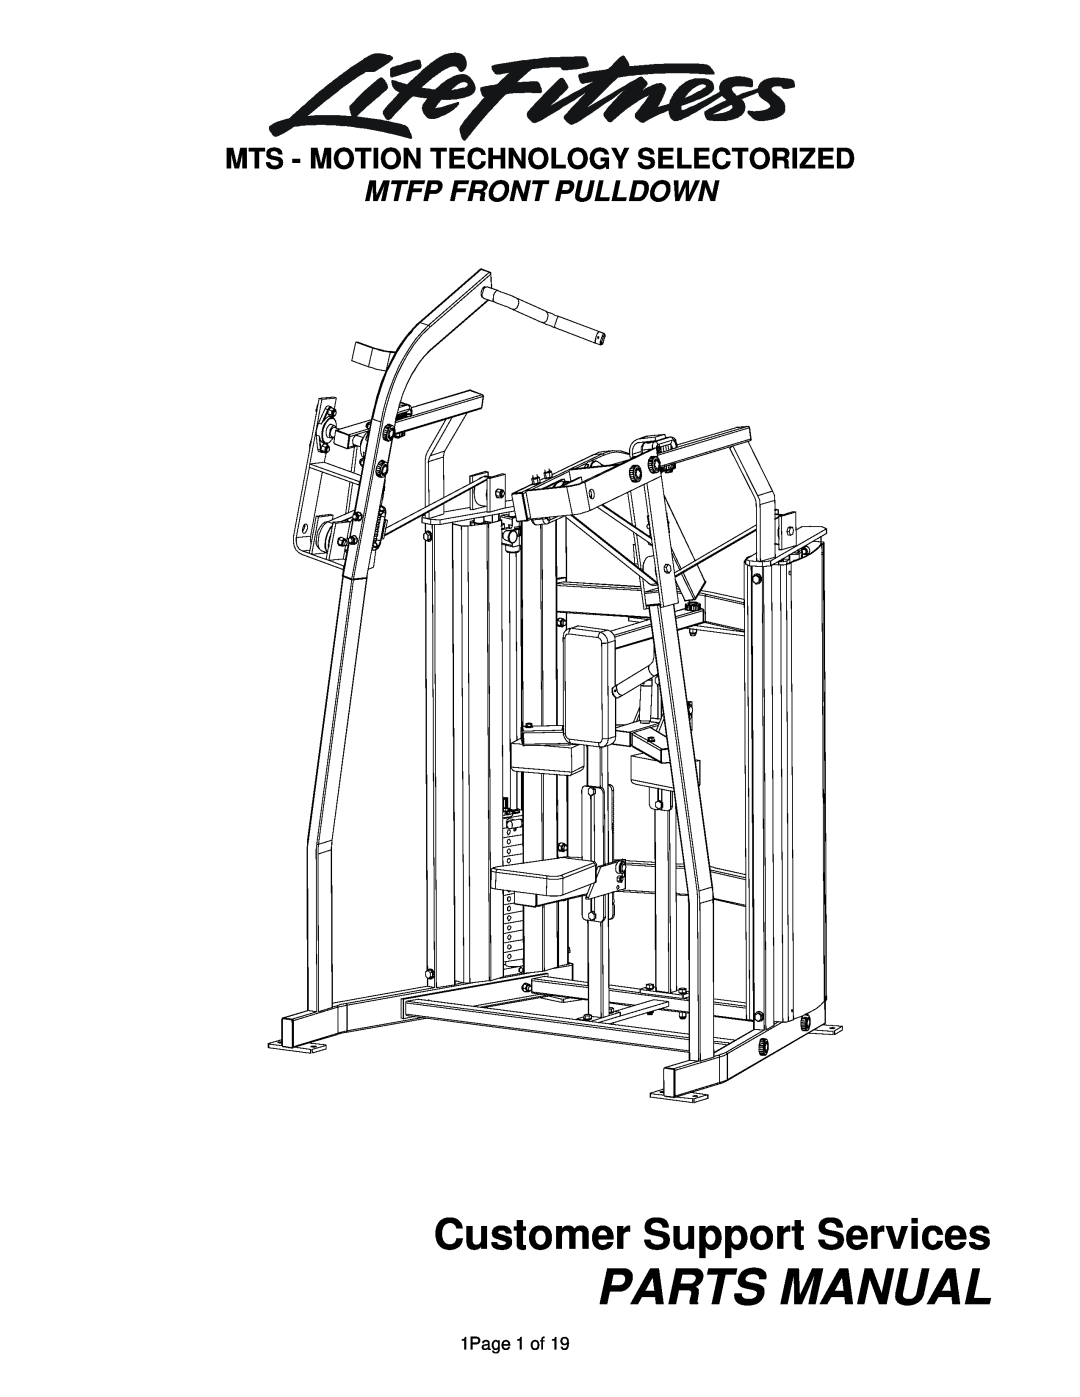 Life Fitness MTFP manual Mts - Motion Technology Selectorized, Mtfp Front Pulldown, Parts Manual, 1Page 1 of 